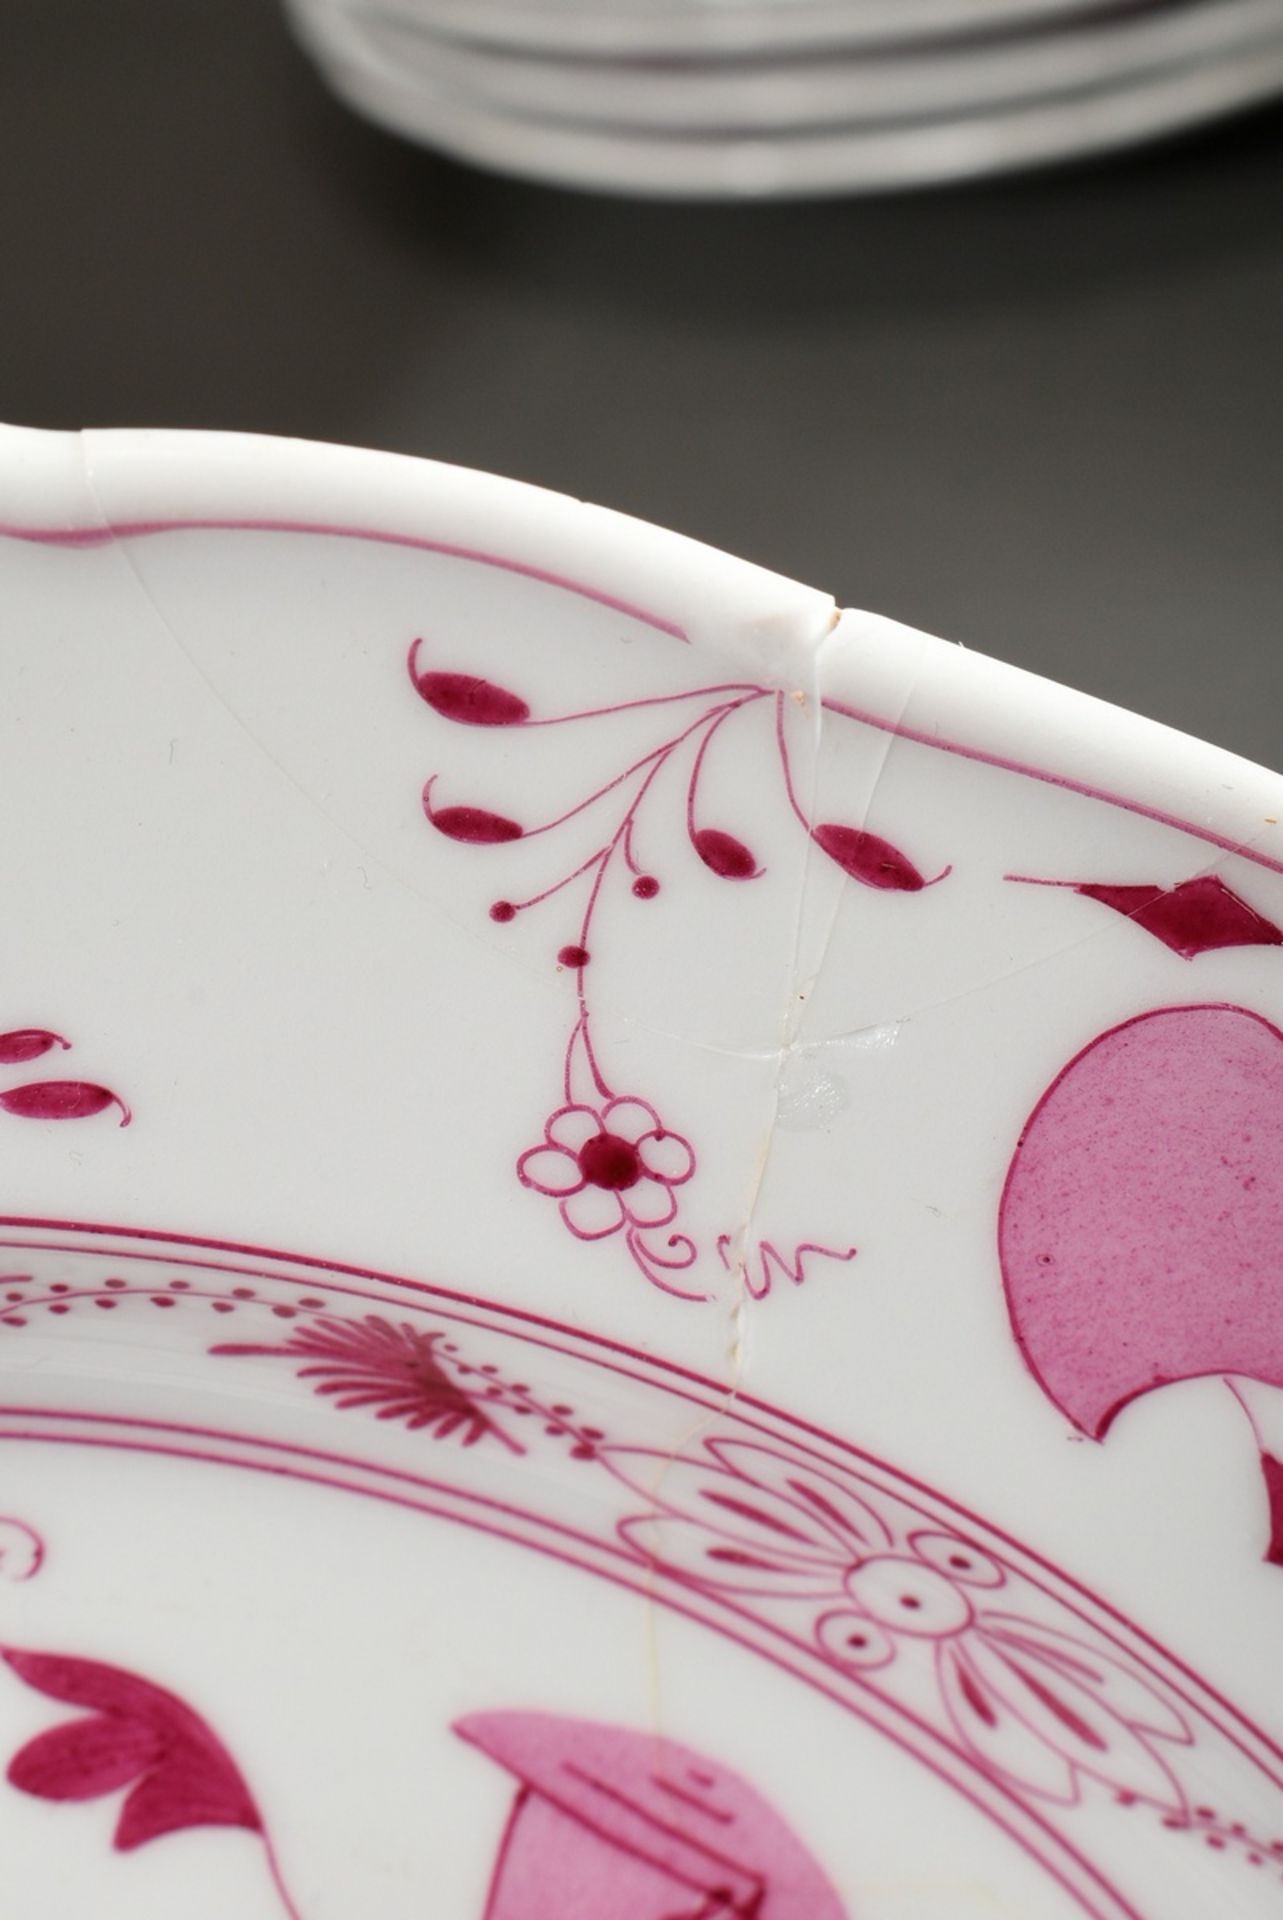 65 Pieces rare Meissen dinner service "Zwiebelmuster Pink", custom made around 1900, consisting of: - Image 27 of 27